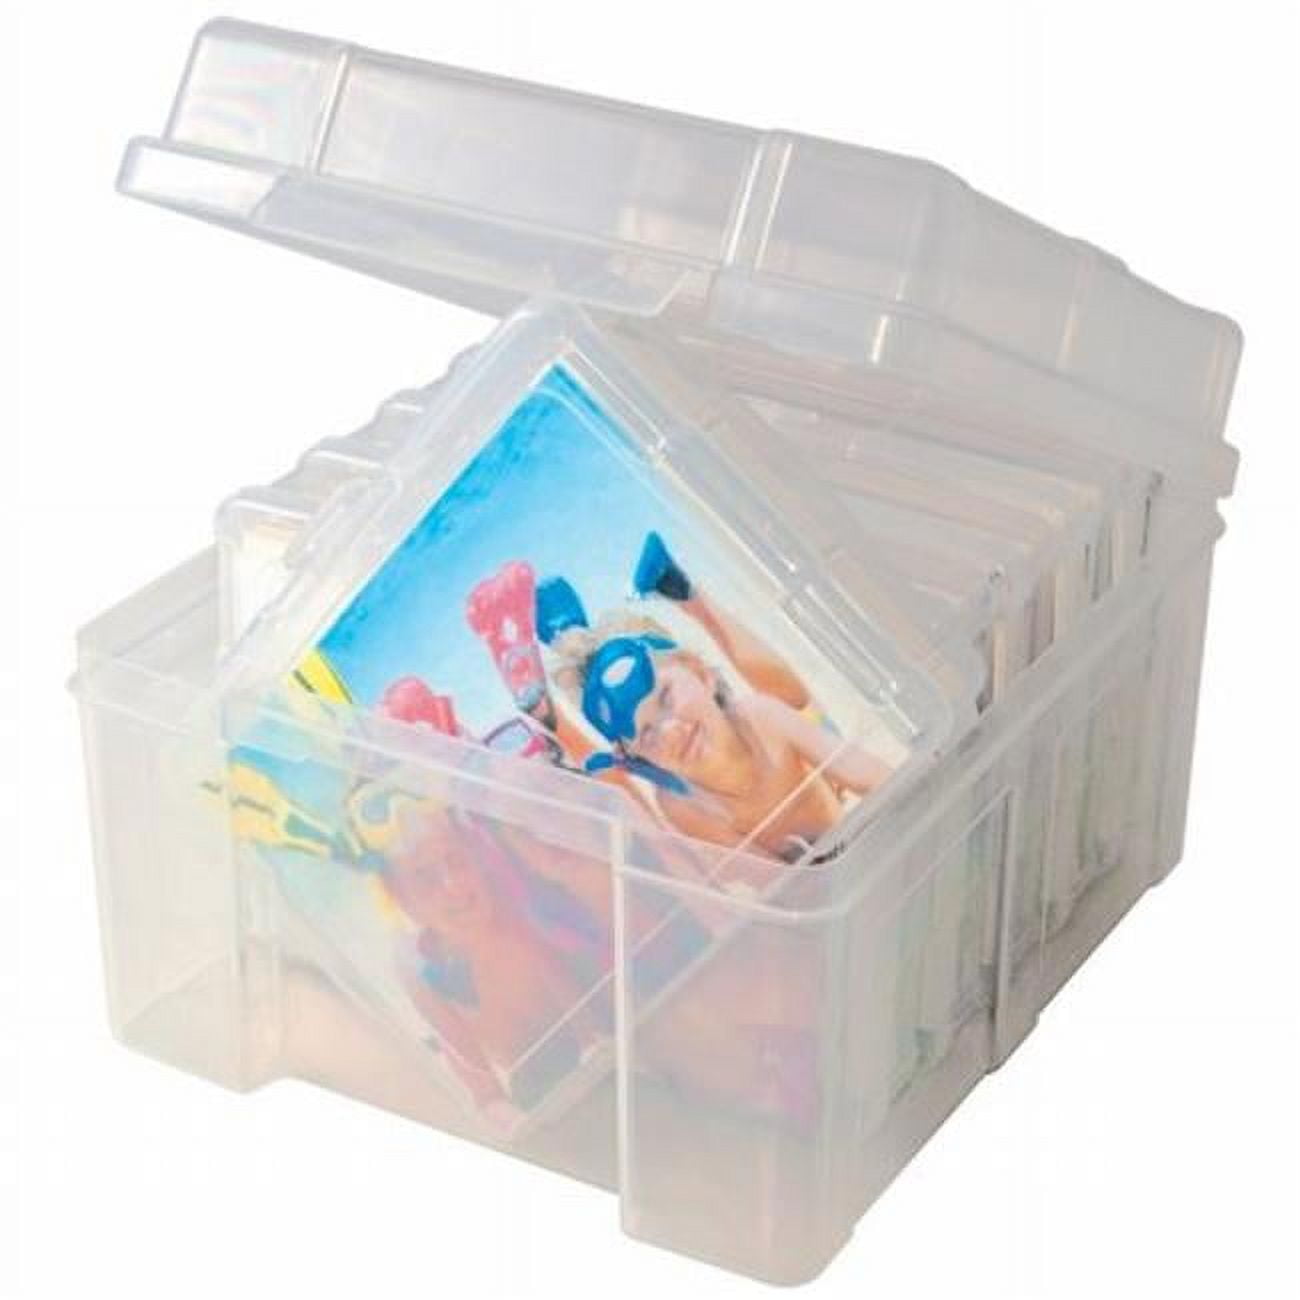 Lierteer 5x7 inch Photo Storage Box Plastic Picture Keeper 6 Colorful Photo  Cases 